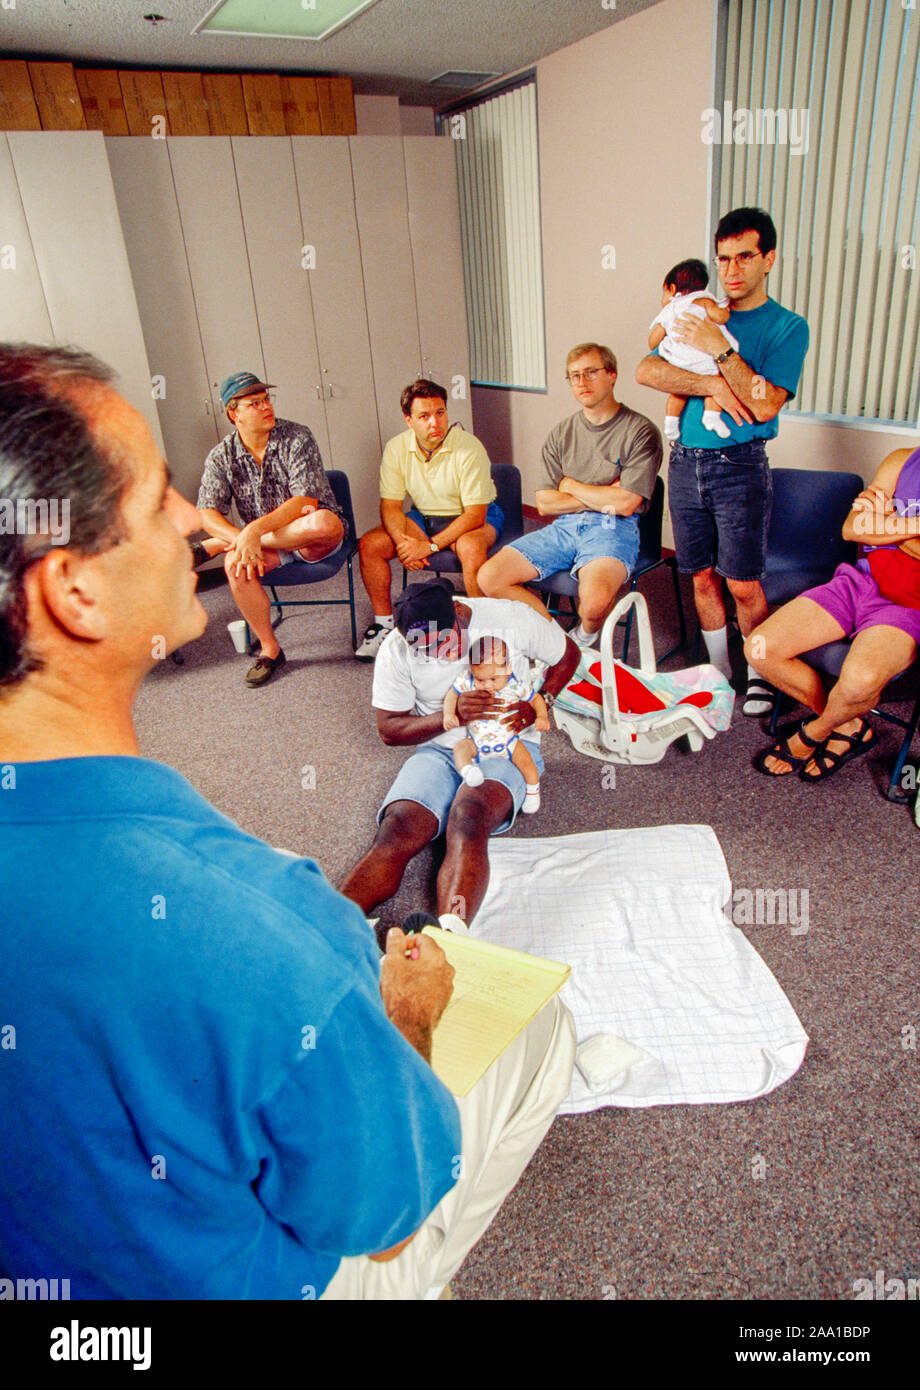 Under the eye of a leader, fathers of newborn children meet with prospective fathers at a supportive "Bootee Camp" in Mission Viejo, CA, with the purpose of allaying their fears of approaching fatherhood. MODEL RELEASE Stock Photo